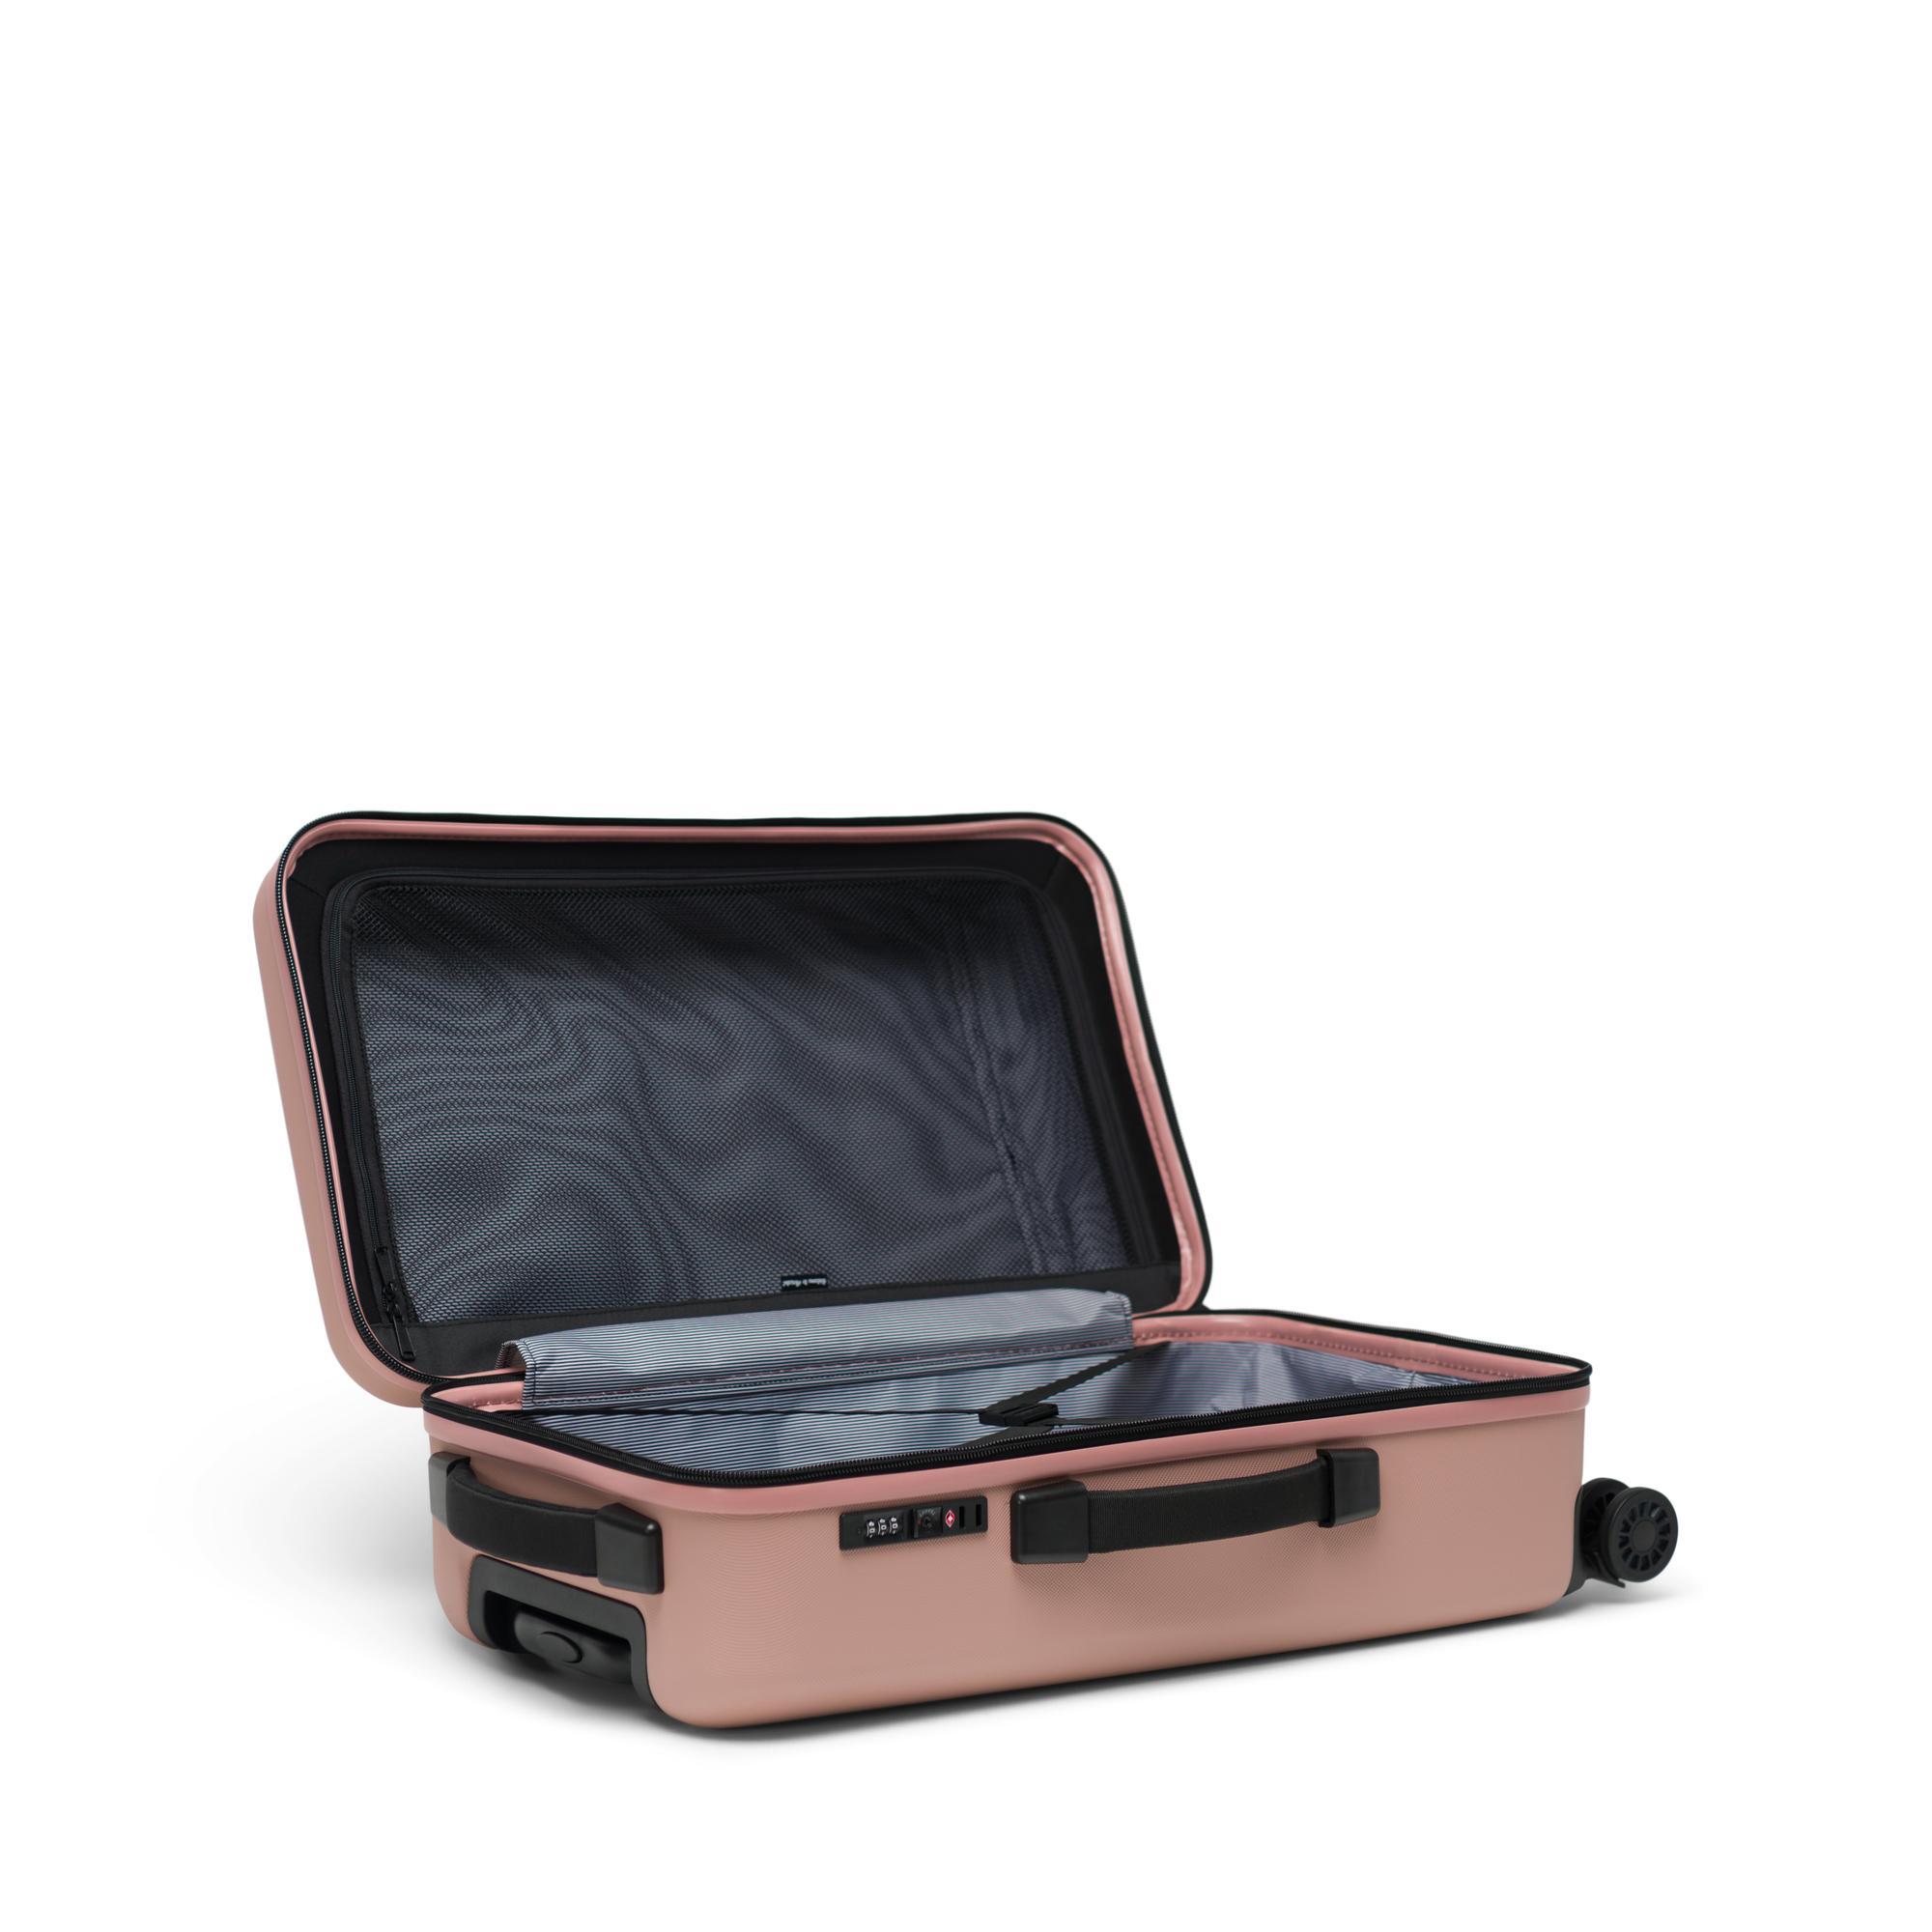 Herschel Supply Co. Rubber Trade Luggage in Ash Rose (Pink) - Lyst